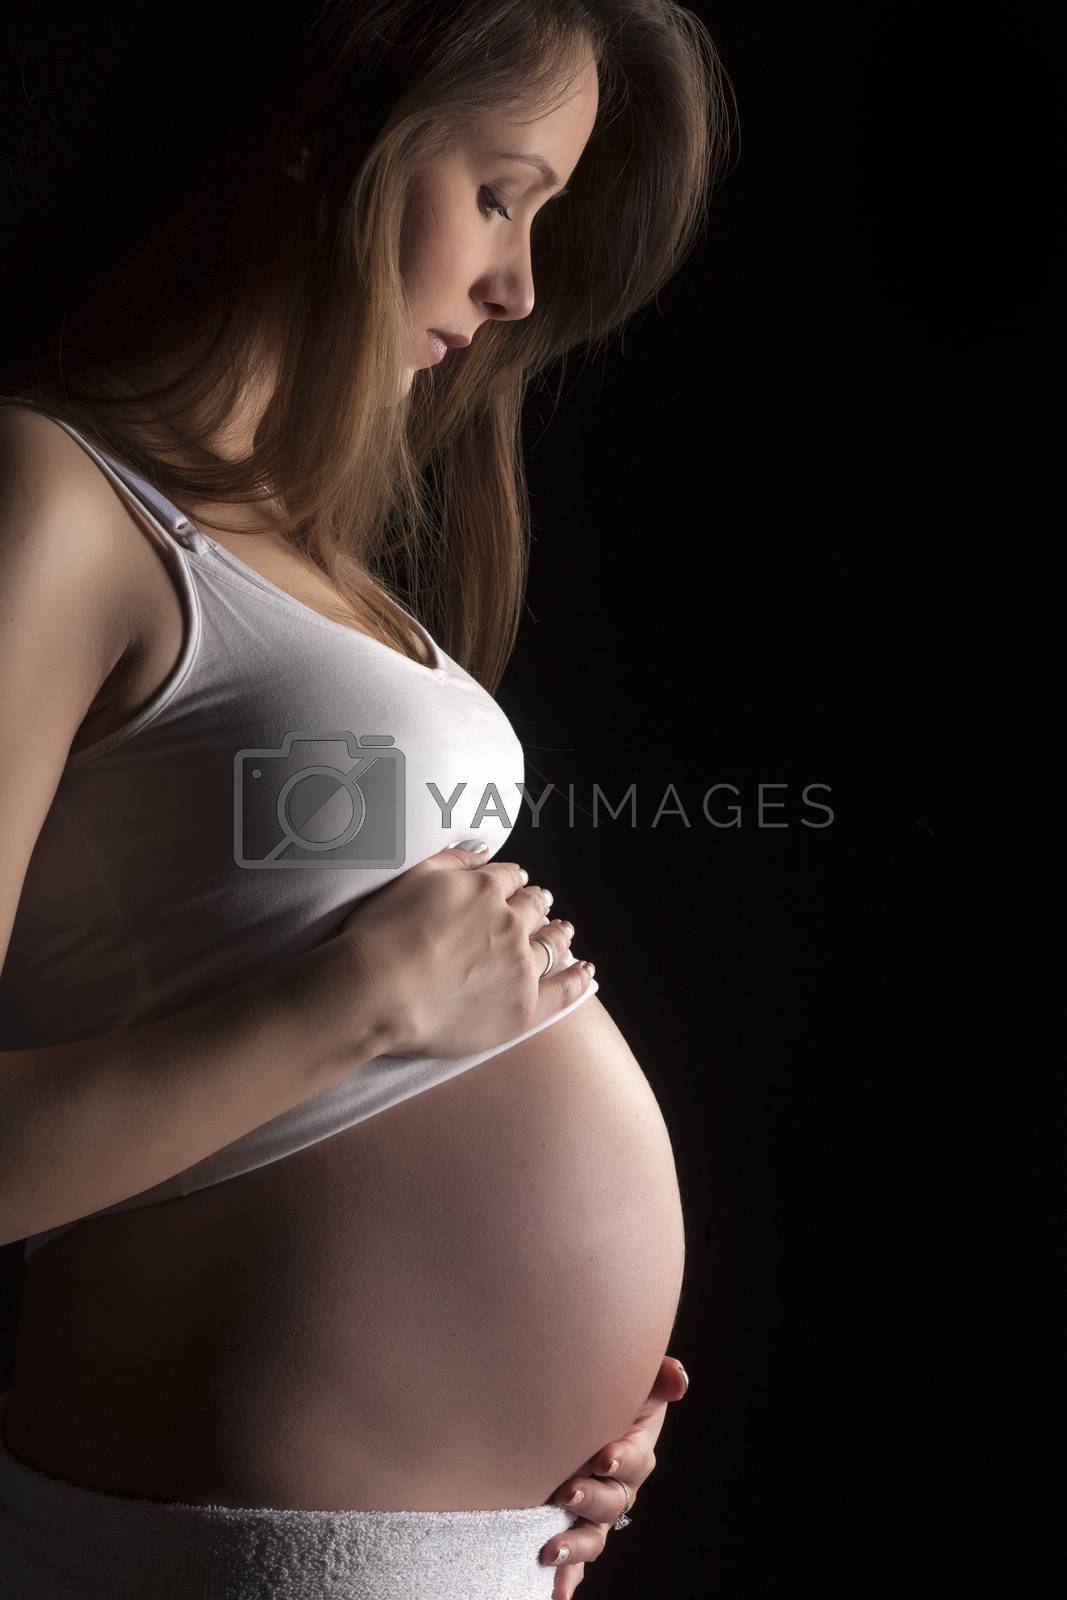 Royalty free image of portrait of the pregnant woman by Vladimirfloyd